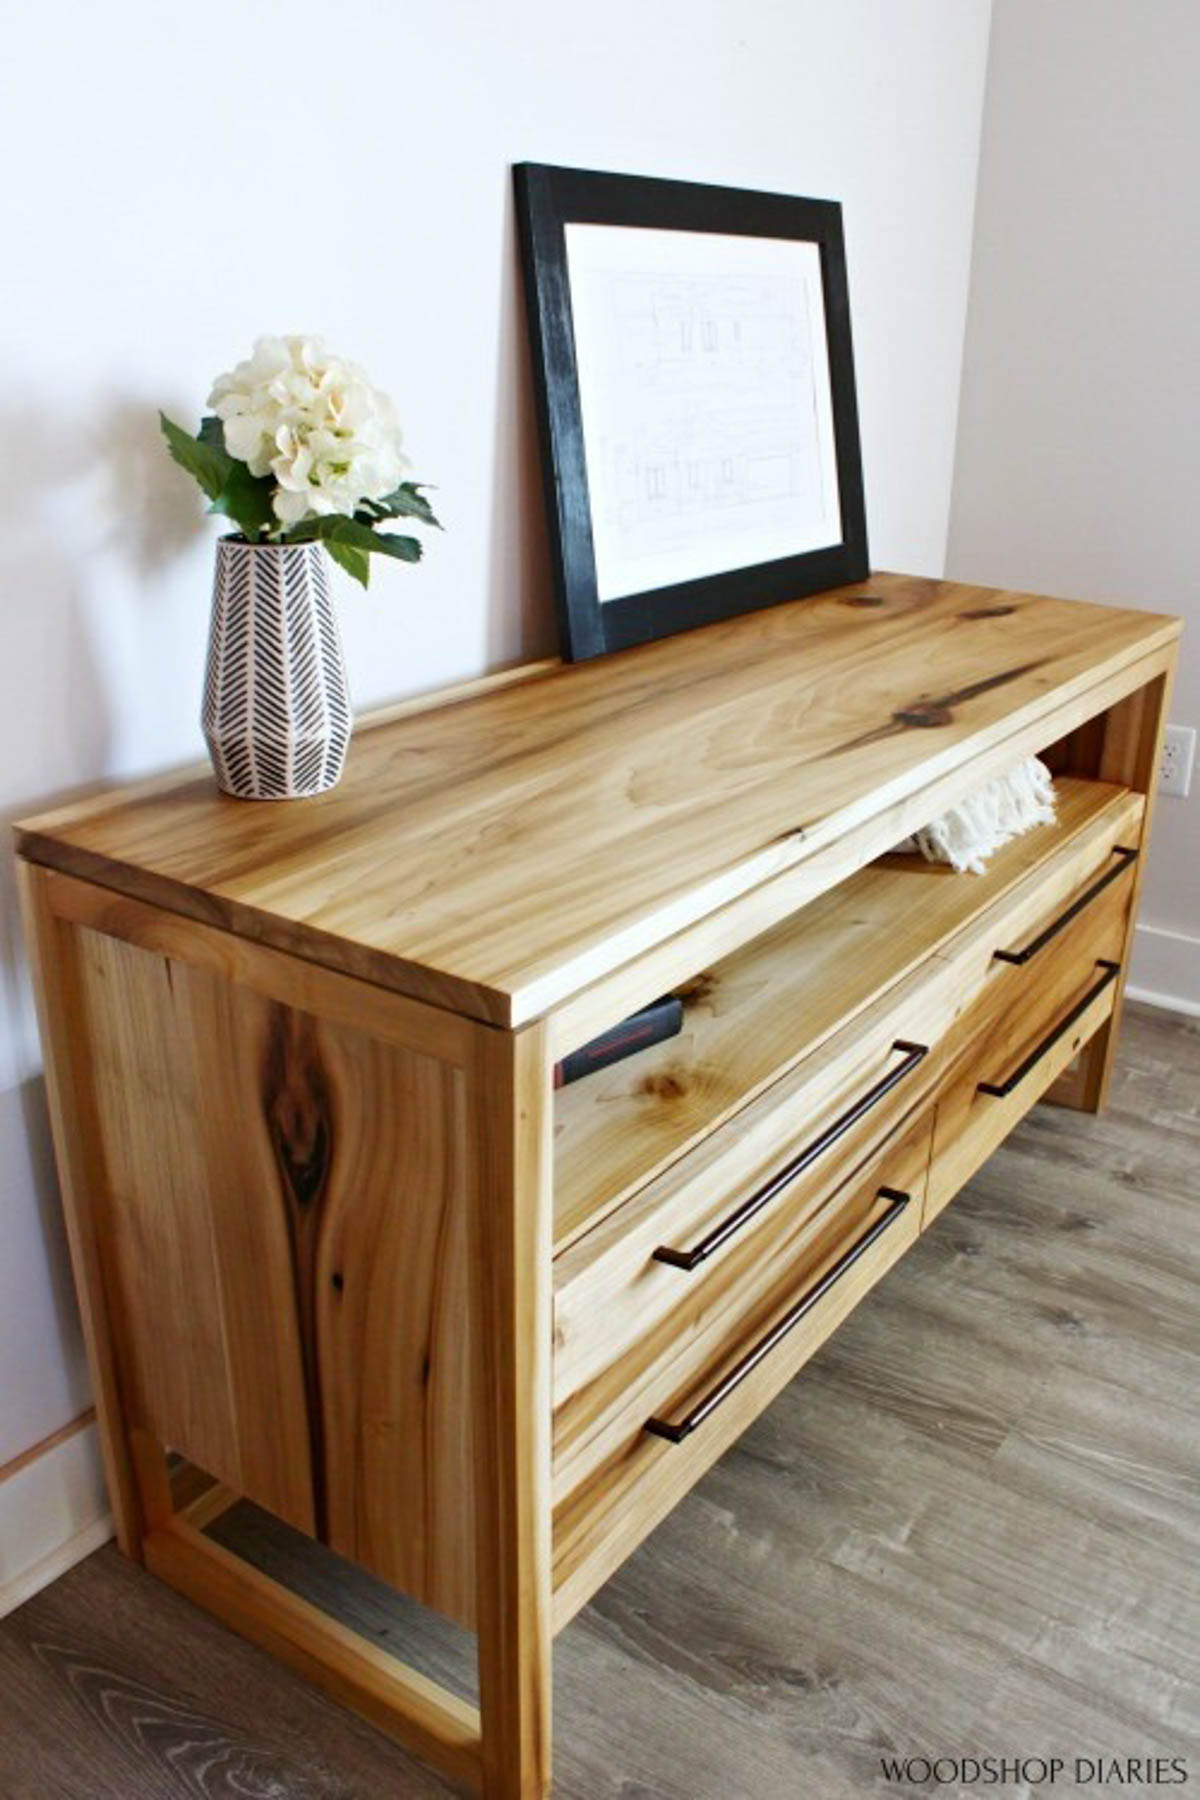 Poplar dresser--DIY Furniture tips to fill large knots with epoxy shown on dresser side